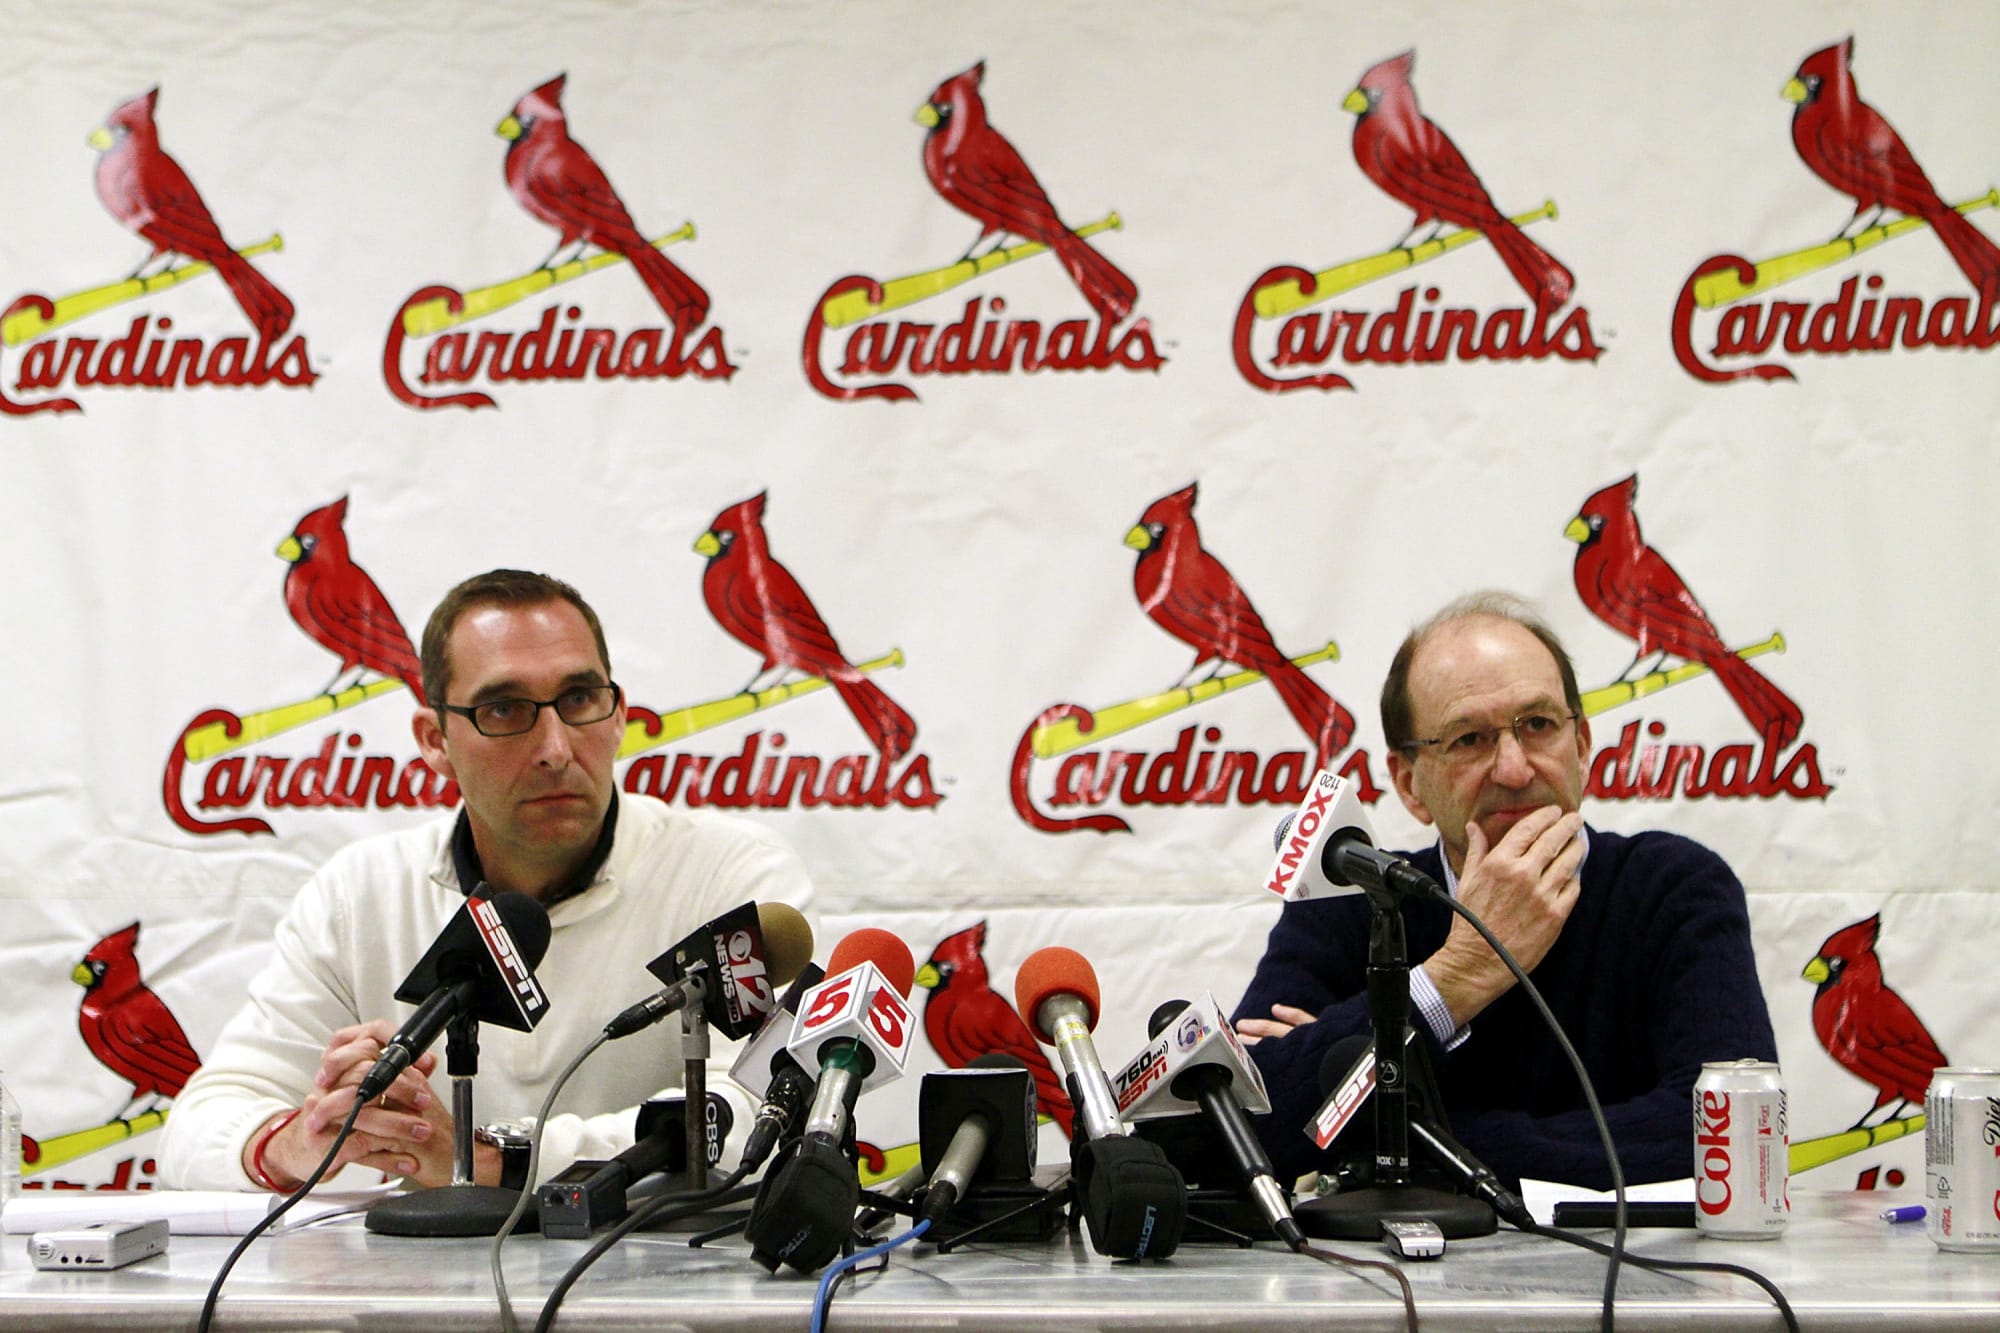 St. Louis Cardinals: Sunshine State is this winter&#39;s tale